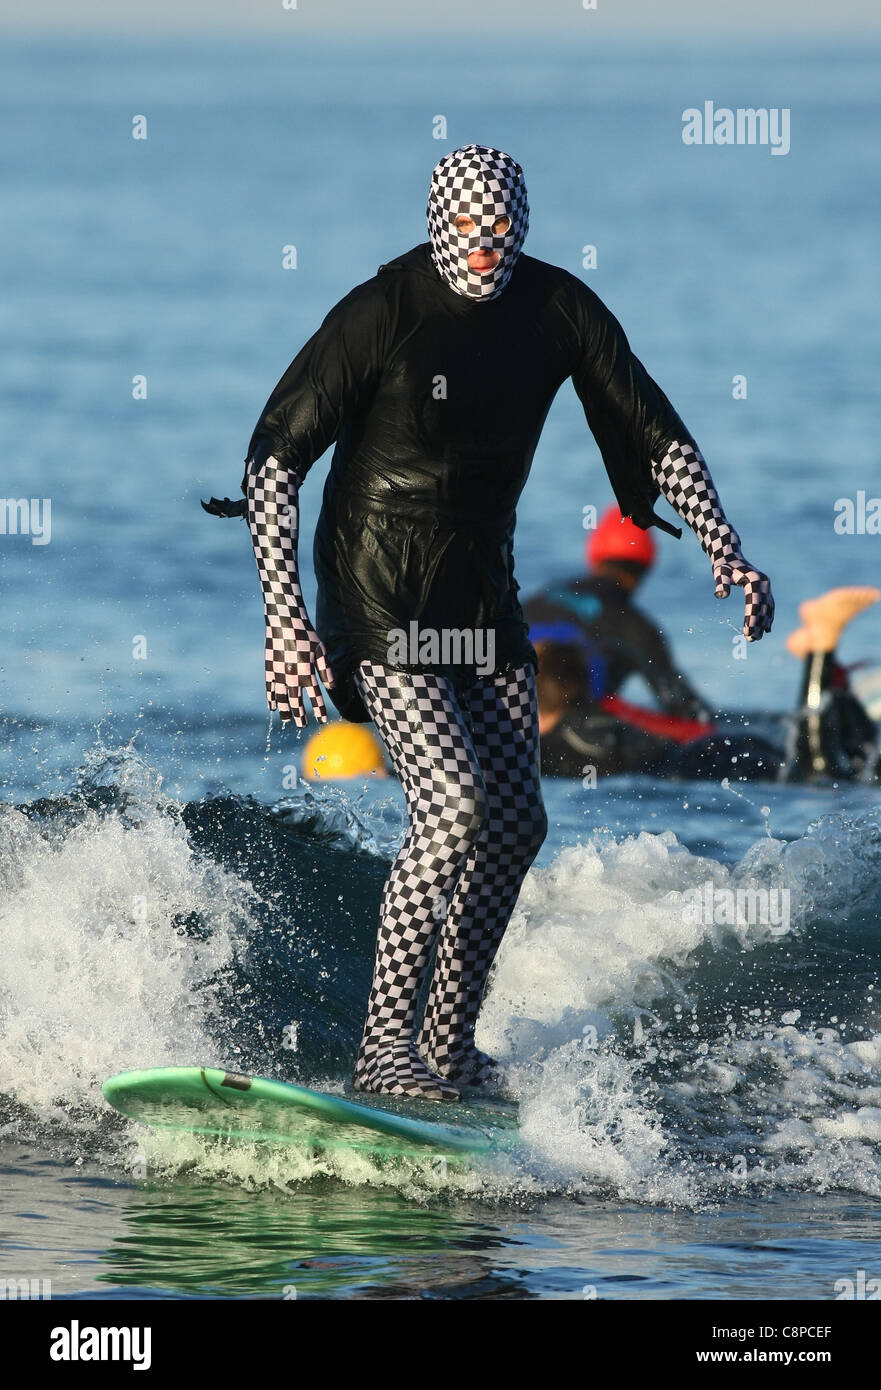 MALE SURFER IN BLACK & WHITE BODY SUIT BLACKIE'S HALLOWEEN COSTUME SURF  CONTEST 2011 ORANGE COUNTY CALIFORNIA USA 29 October 2 Stock Photo - Alamy